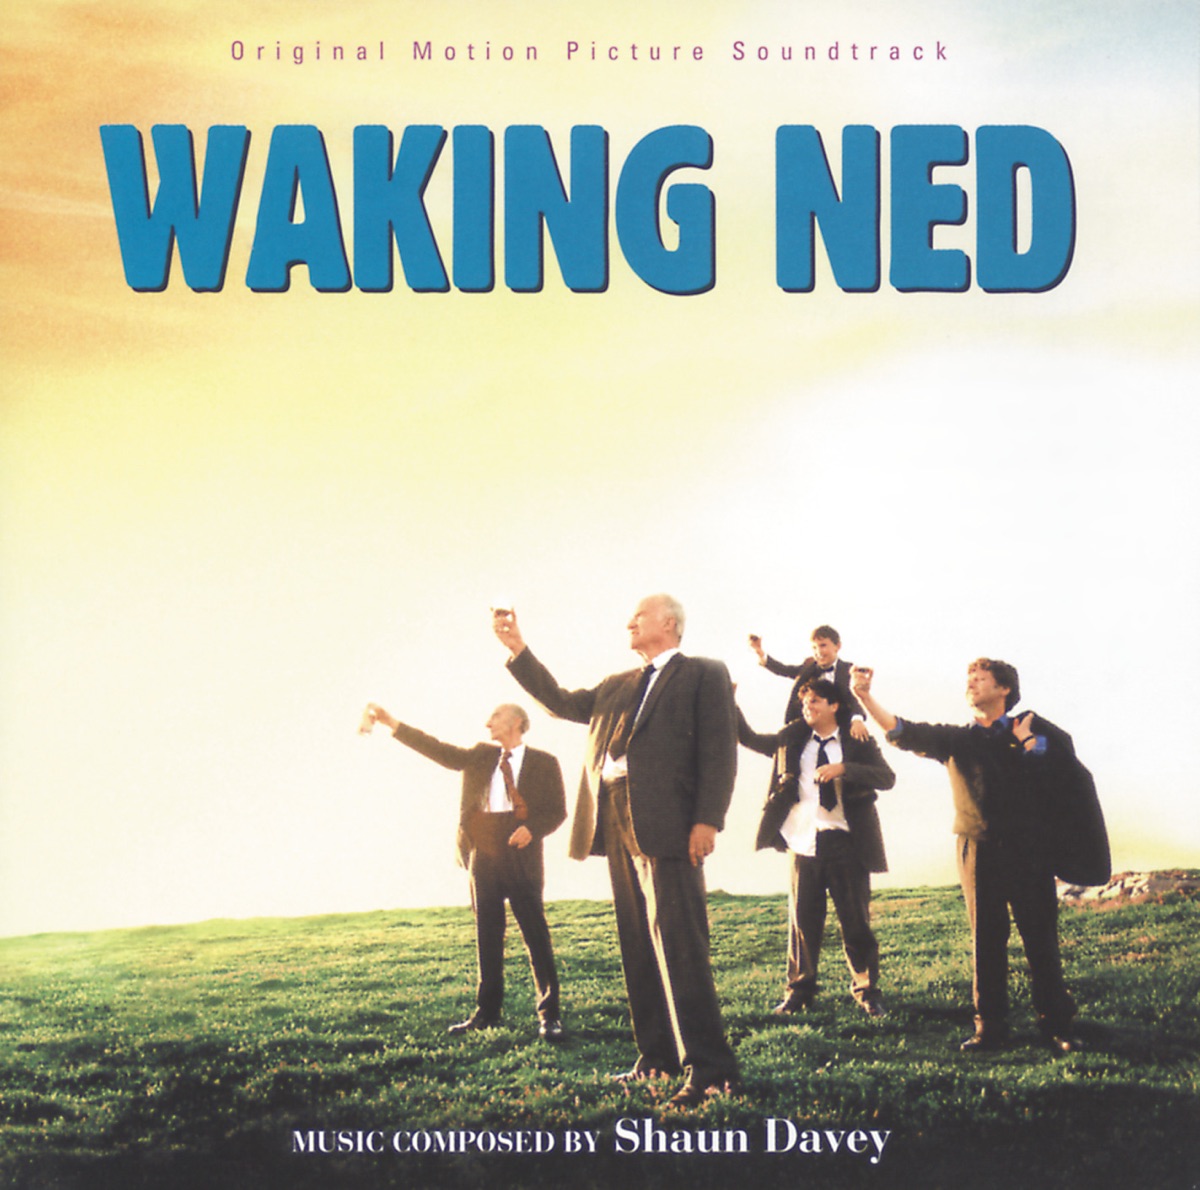 ‎Waking Ned - Original Soundtrack by O.S.T. on Apple Music